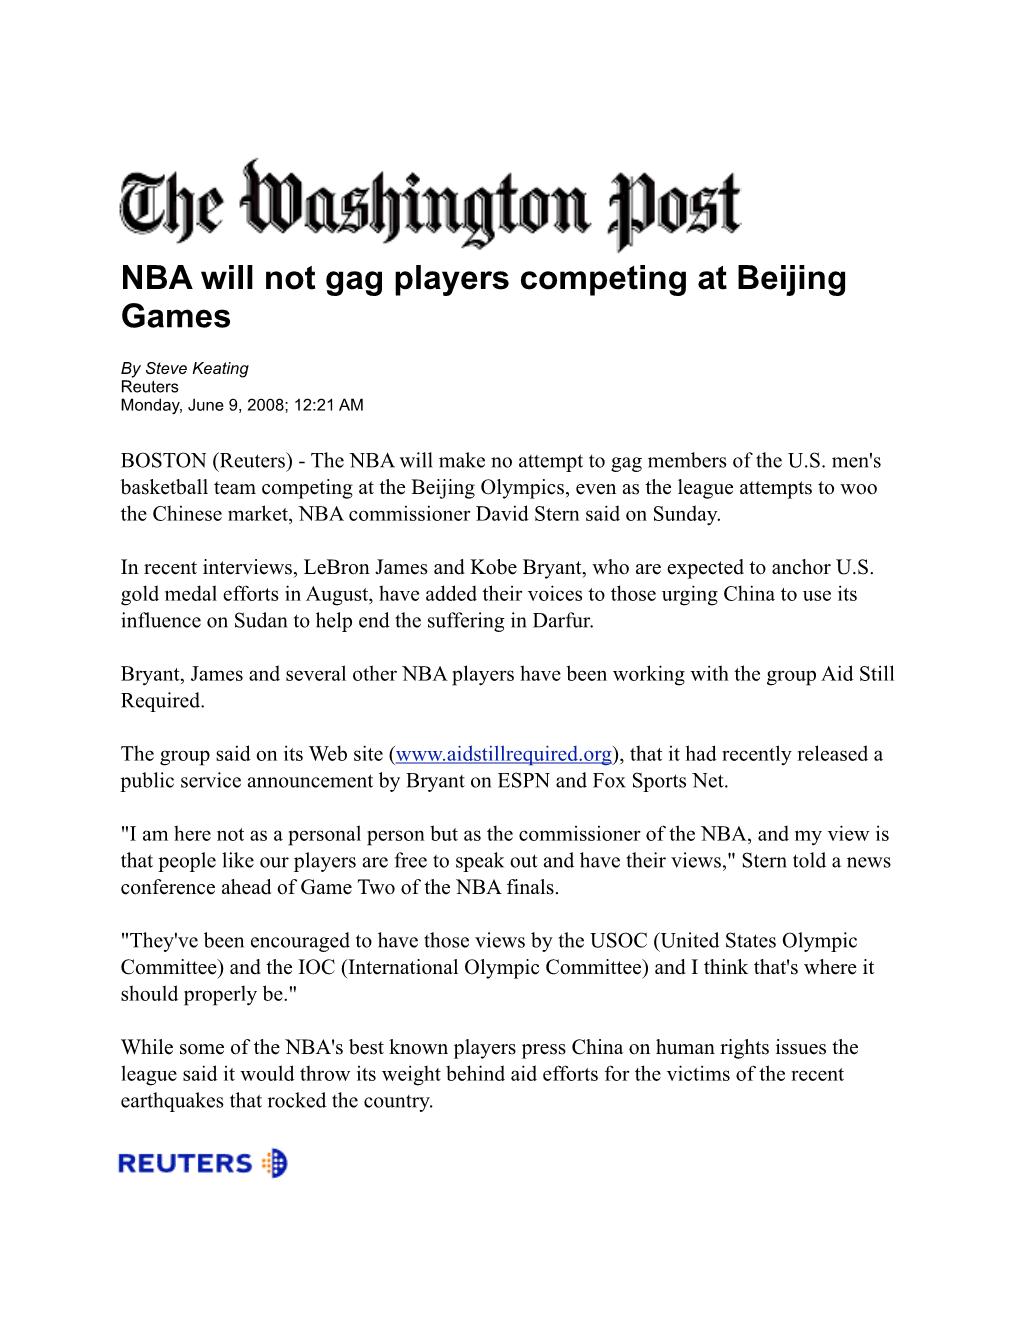 NBA Will Not Gag Players Competing at Beijing Games